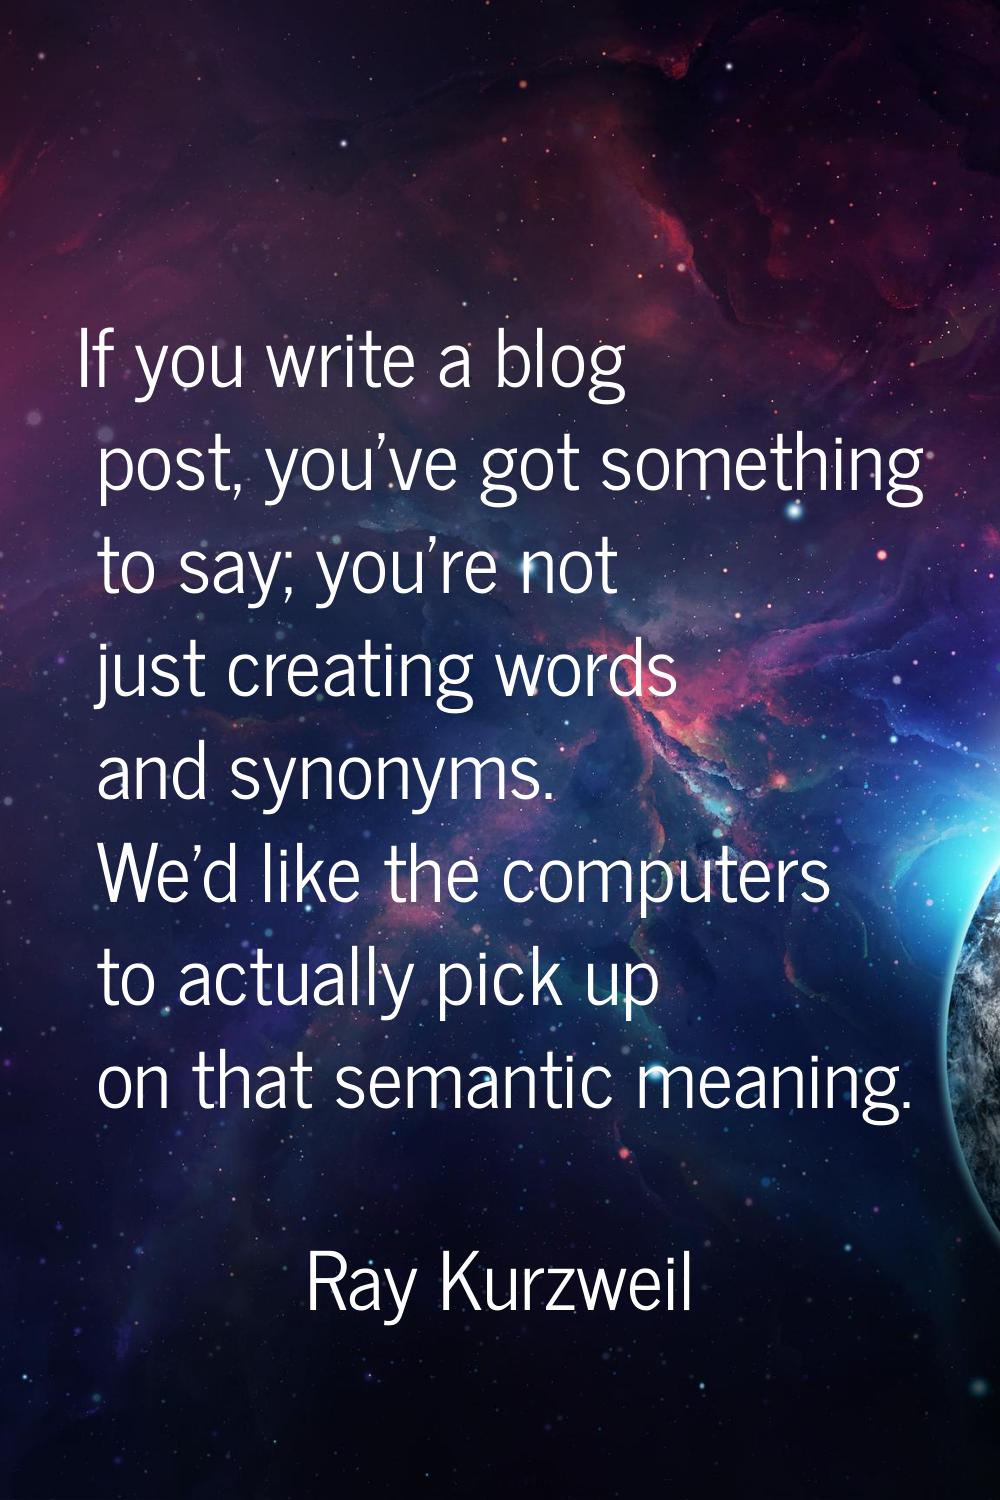 If you write a blog post, you've got something to say; you're not just creating words and synonyms.